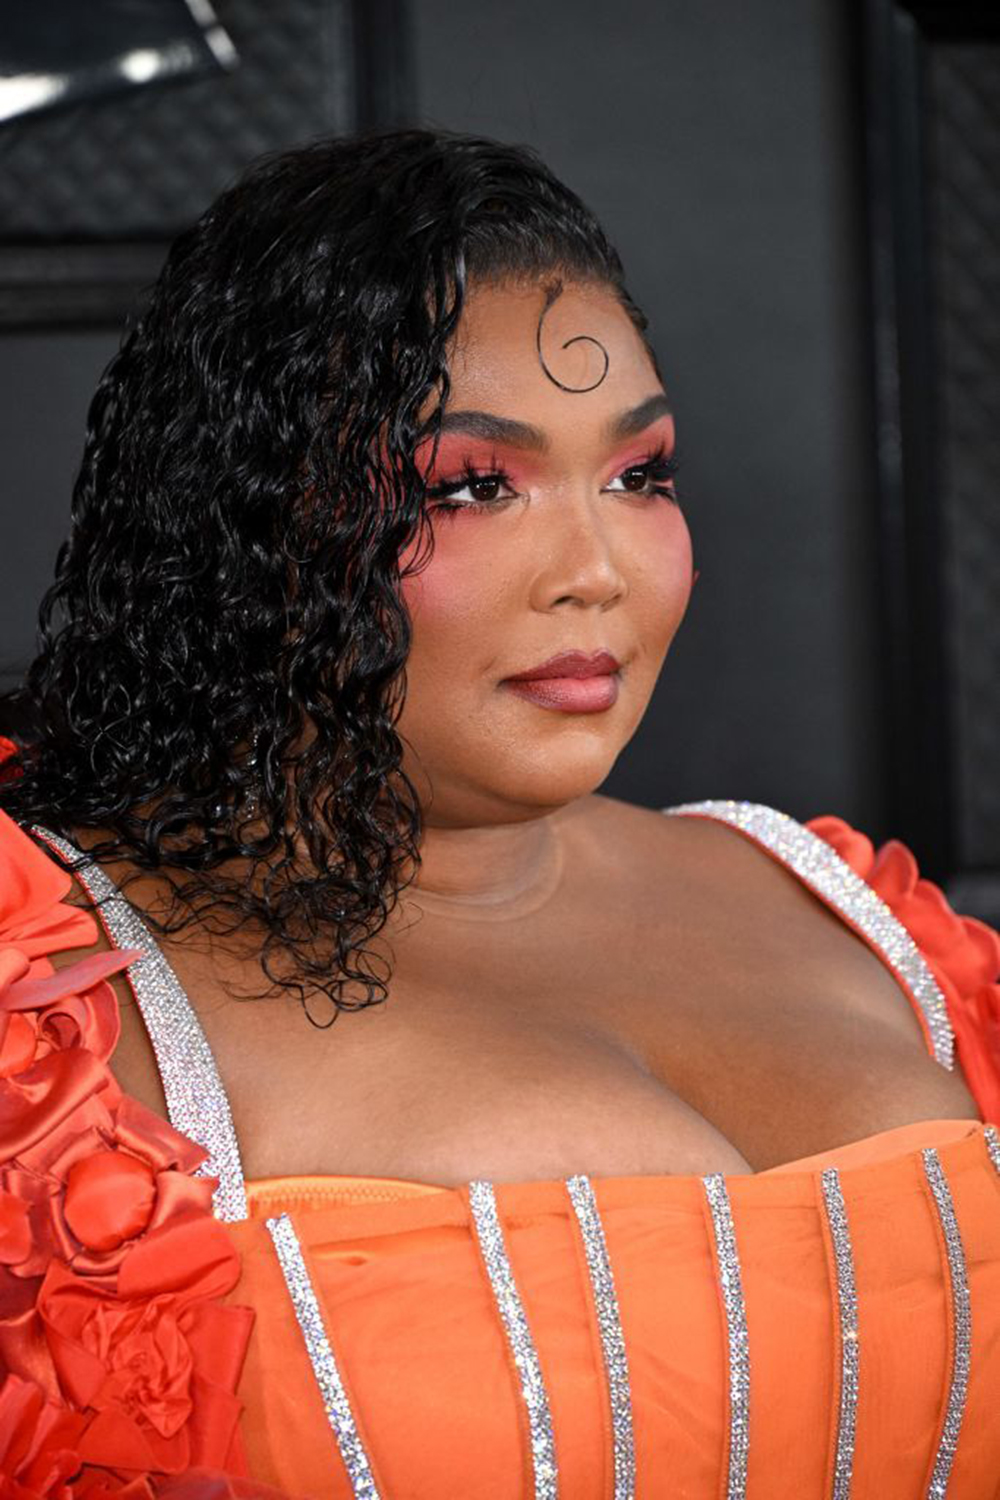 Singer Lizzo stands out on the red carpet.